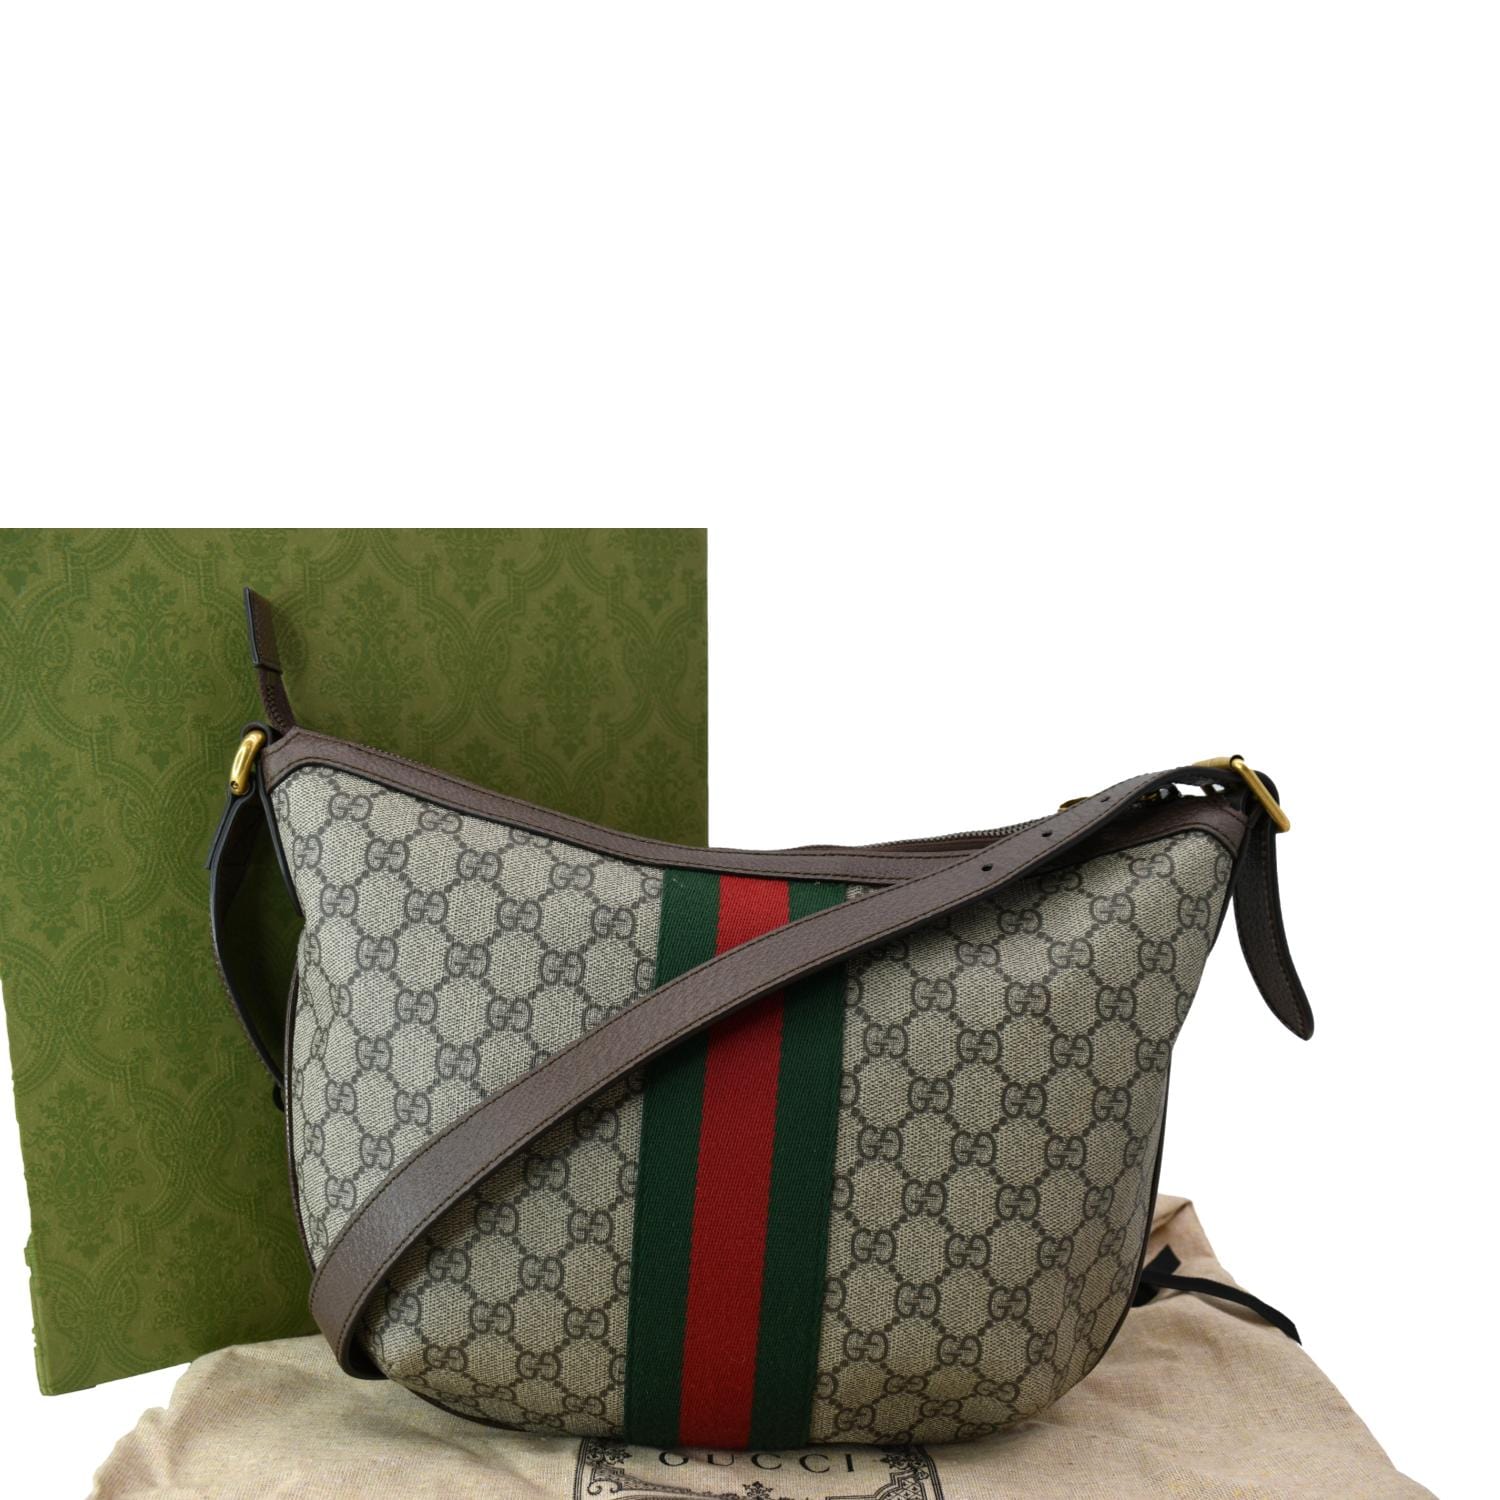 Ophidia small duffle bag in grey and black Supreme